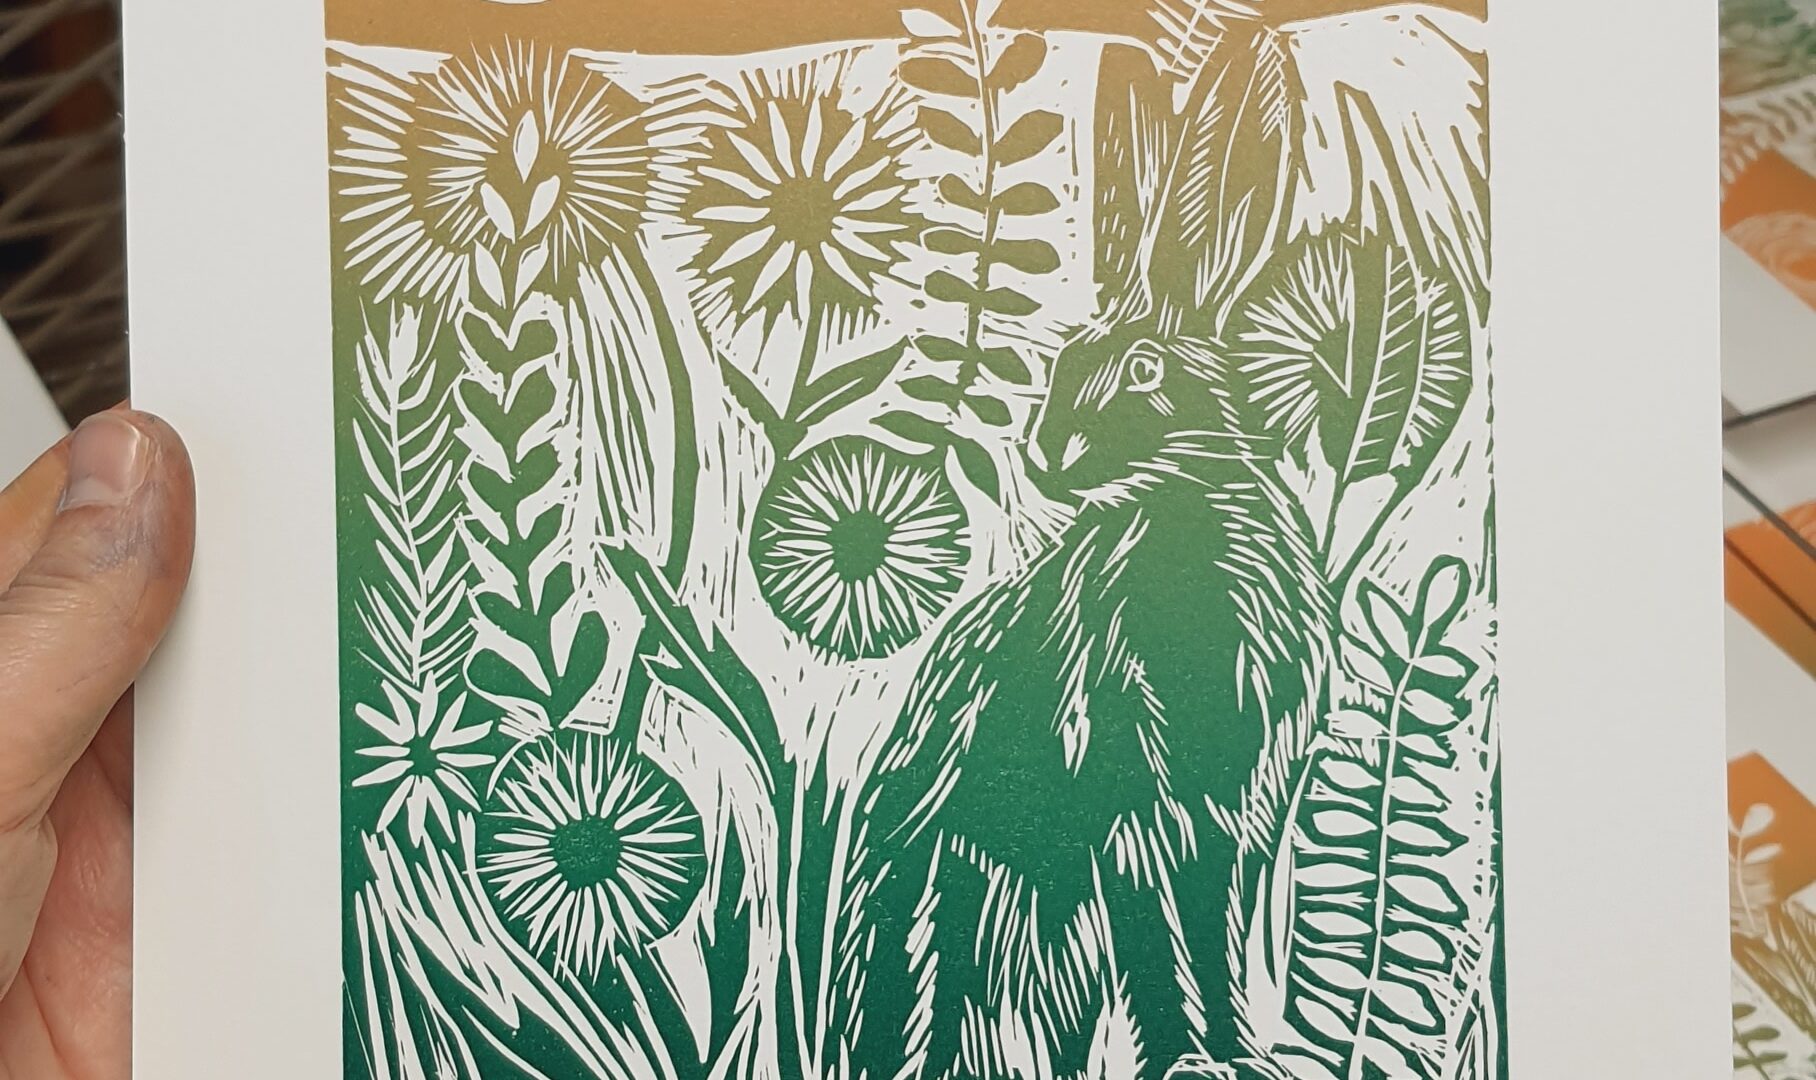 Image of a Linoprint rabbits in a field